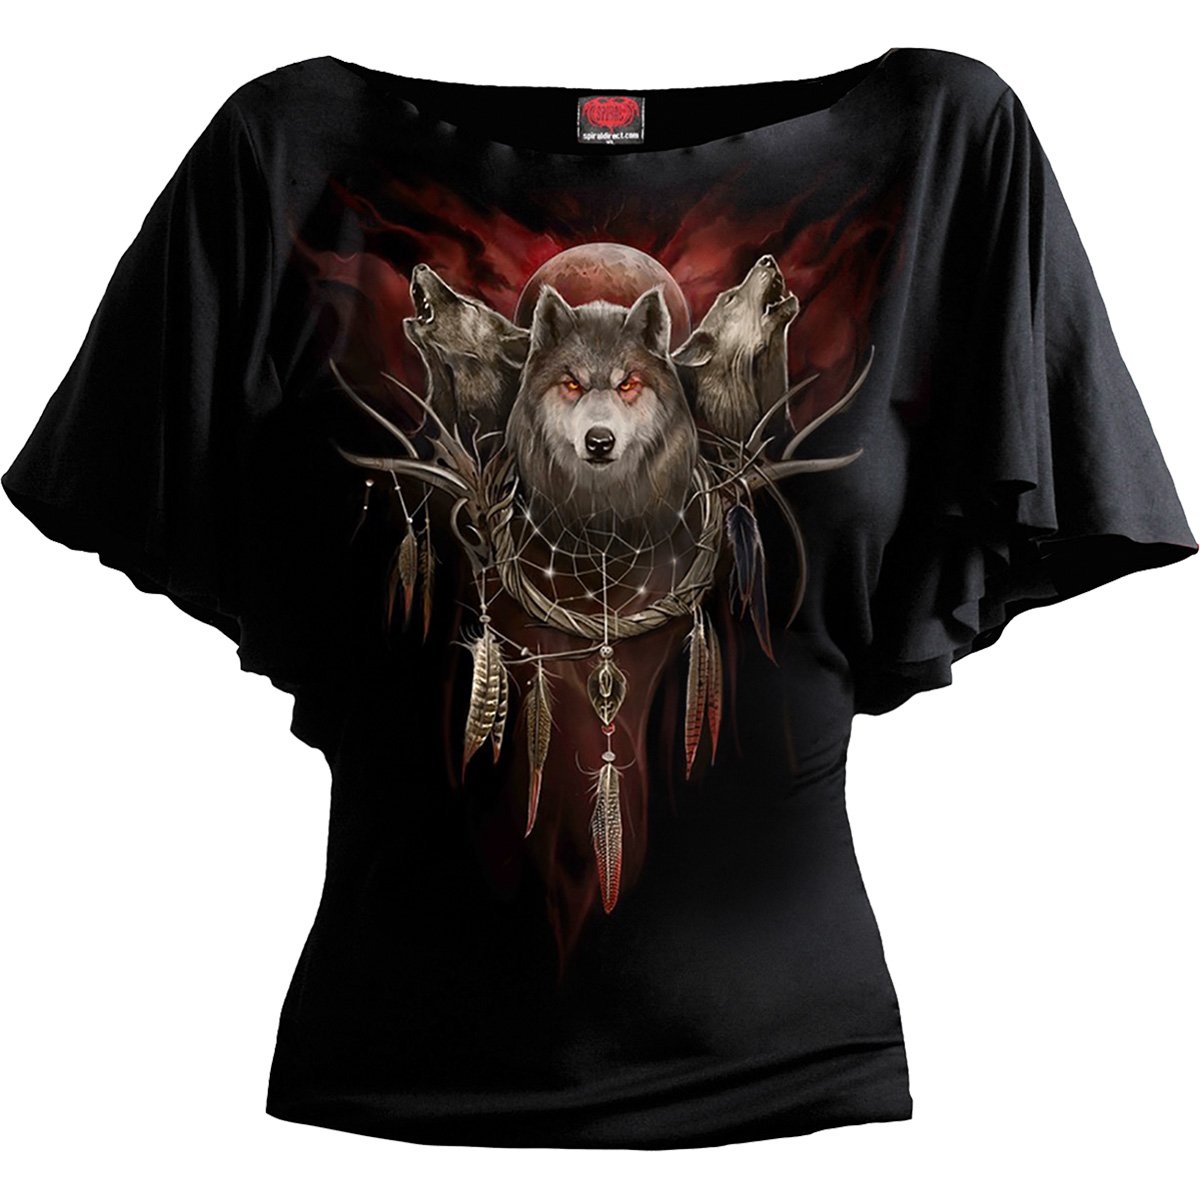 CRY OF THE WOLF - Boat Neck Bat Sleeve Top Black - Spiral USA